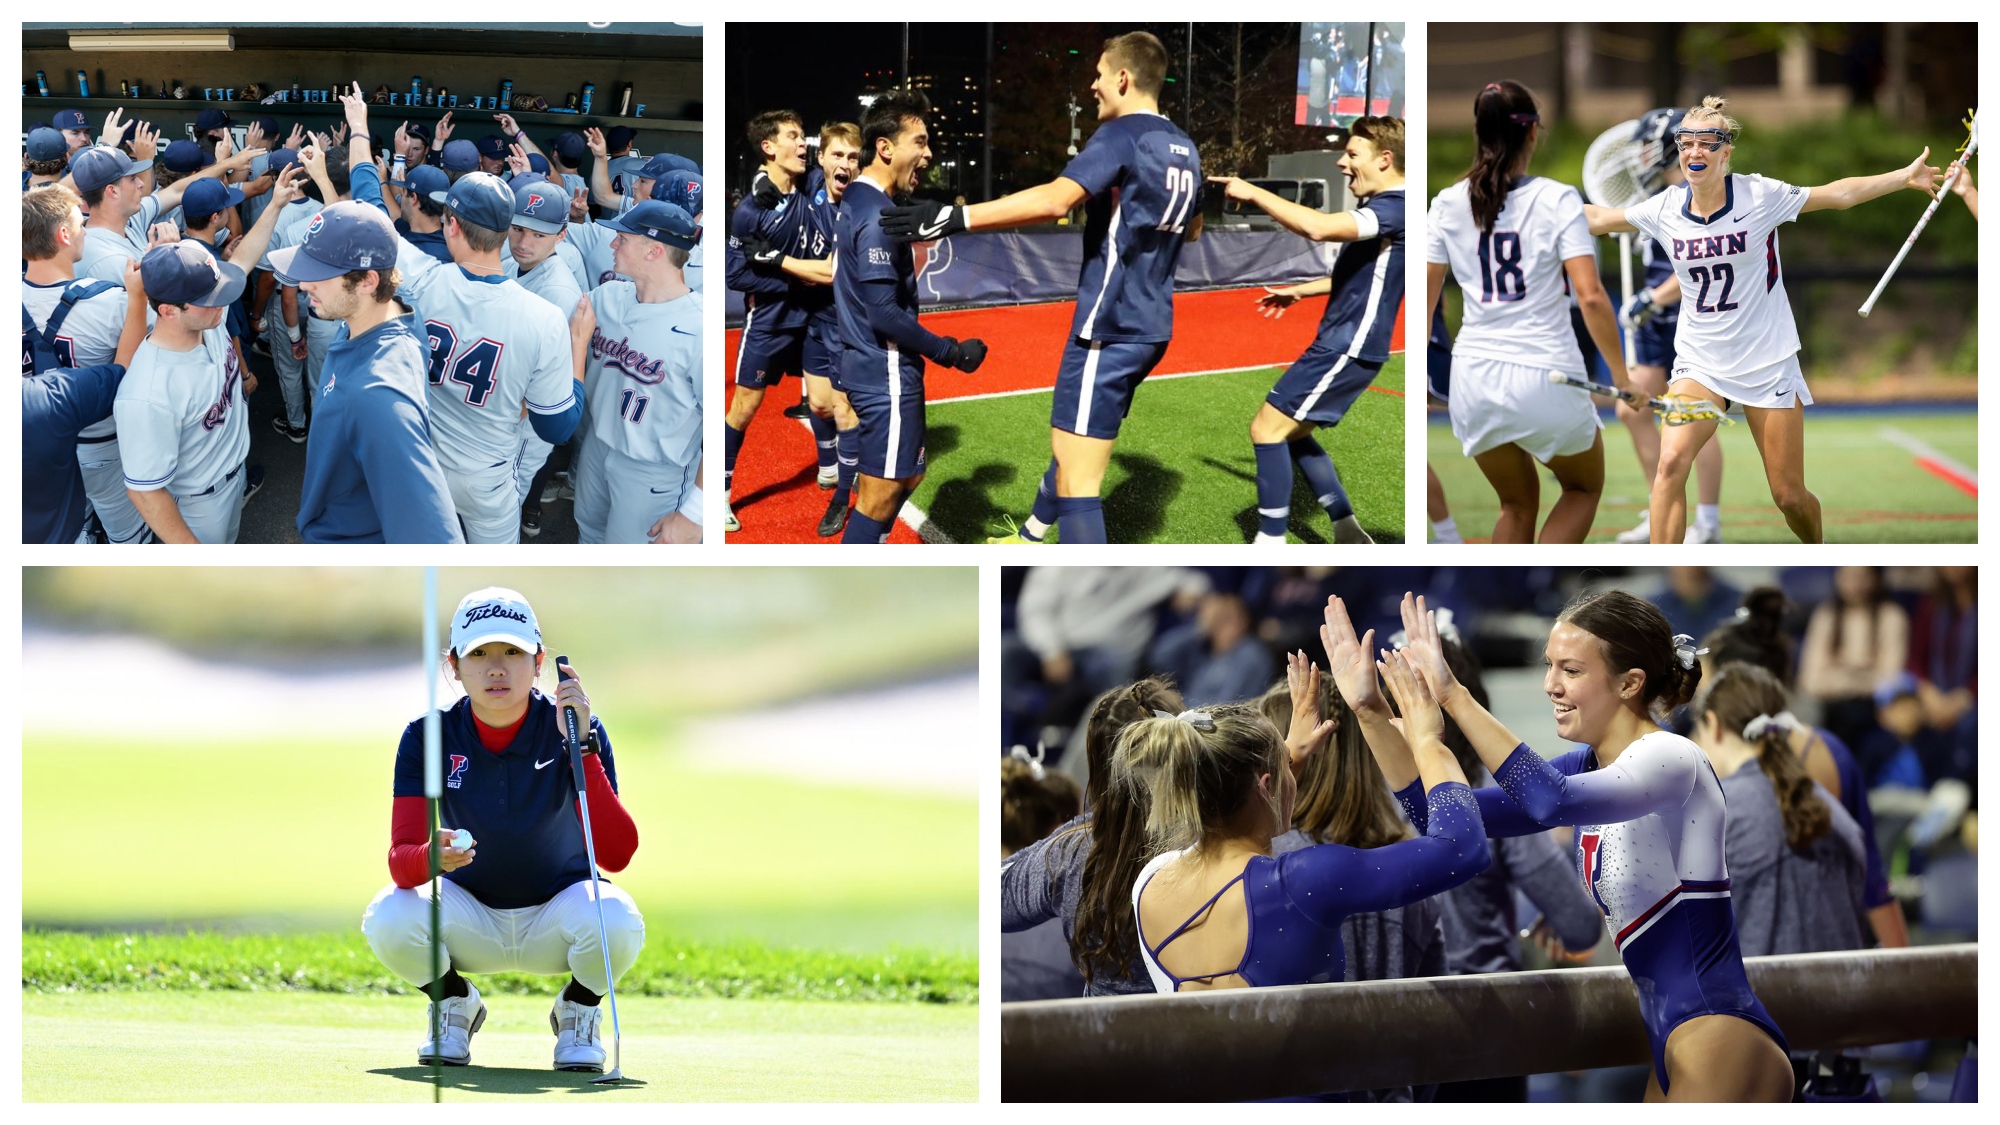 A grid showing baseball, men's soccer, women's lacrosse, women's golf, and gymnastics Penn student-athletes performing on the field.